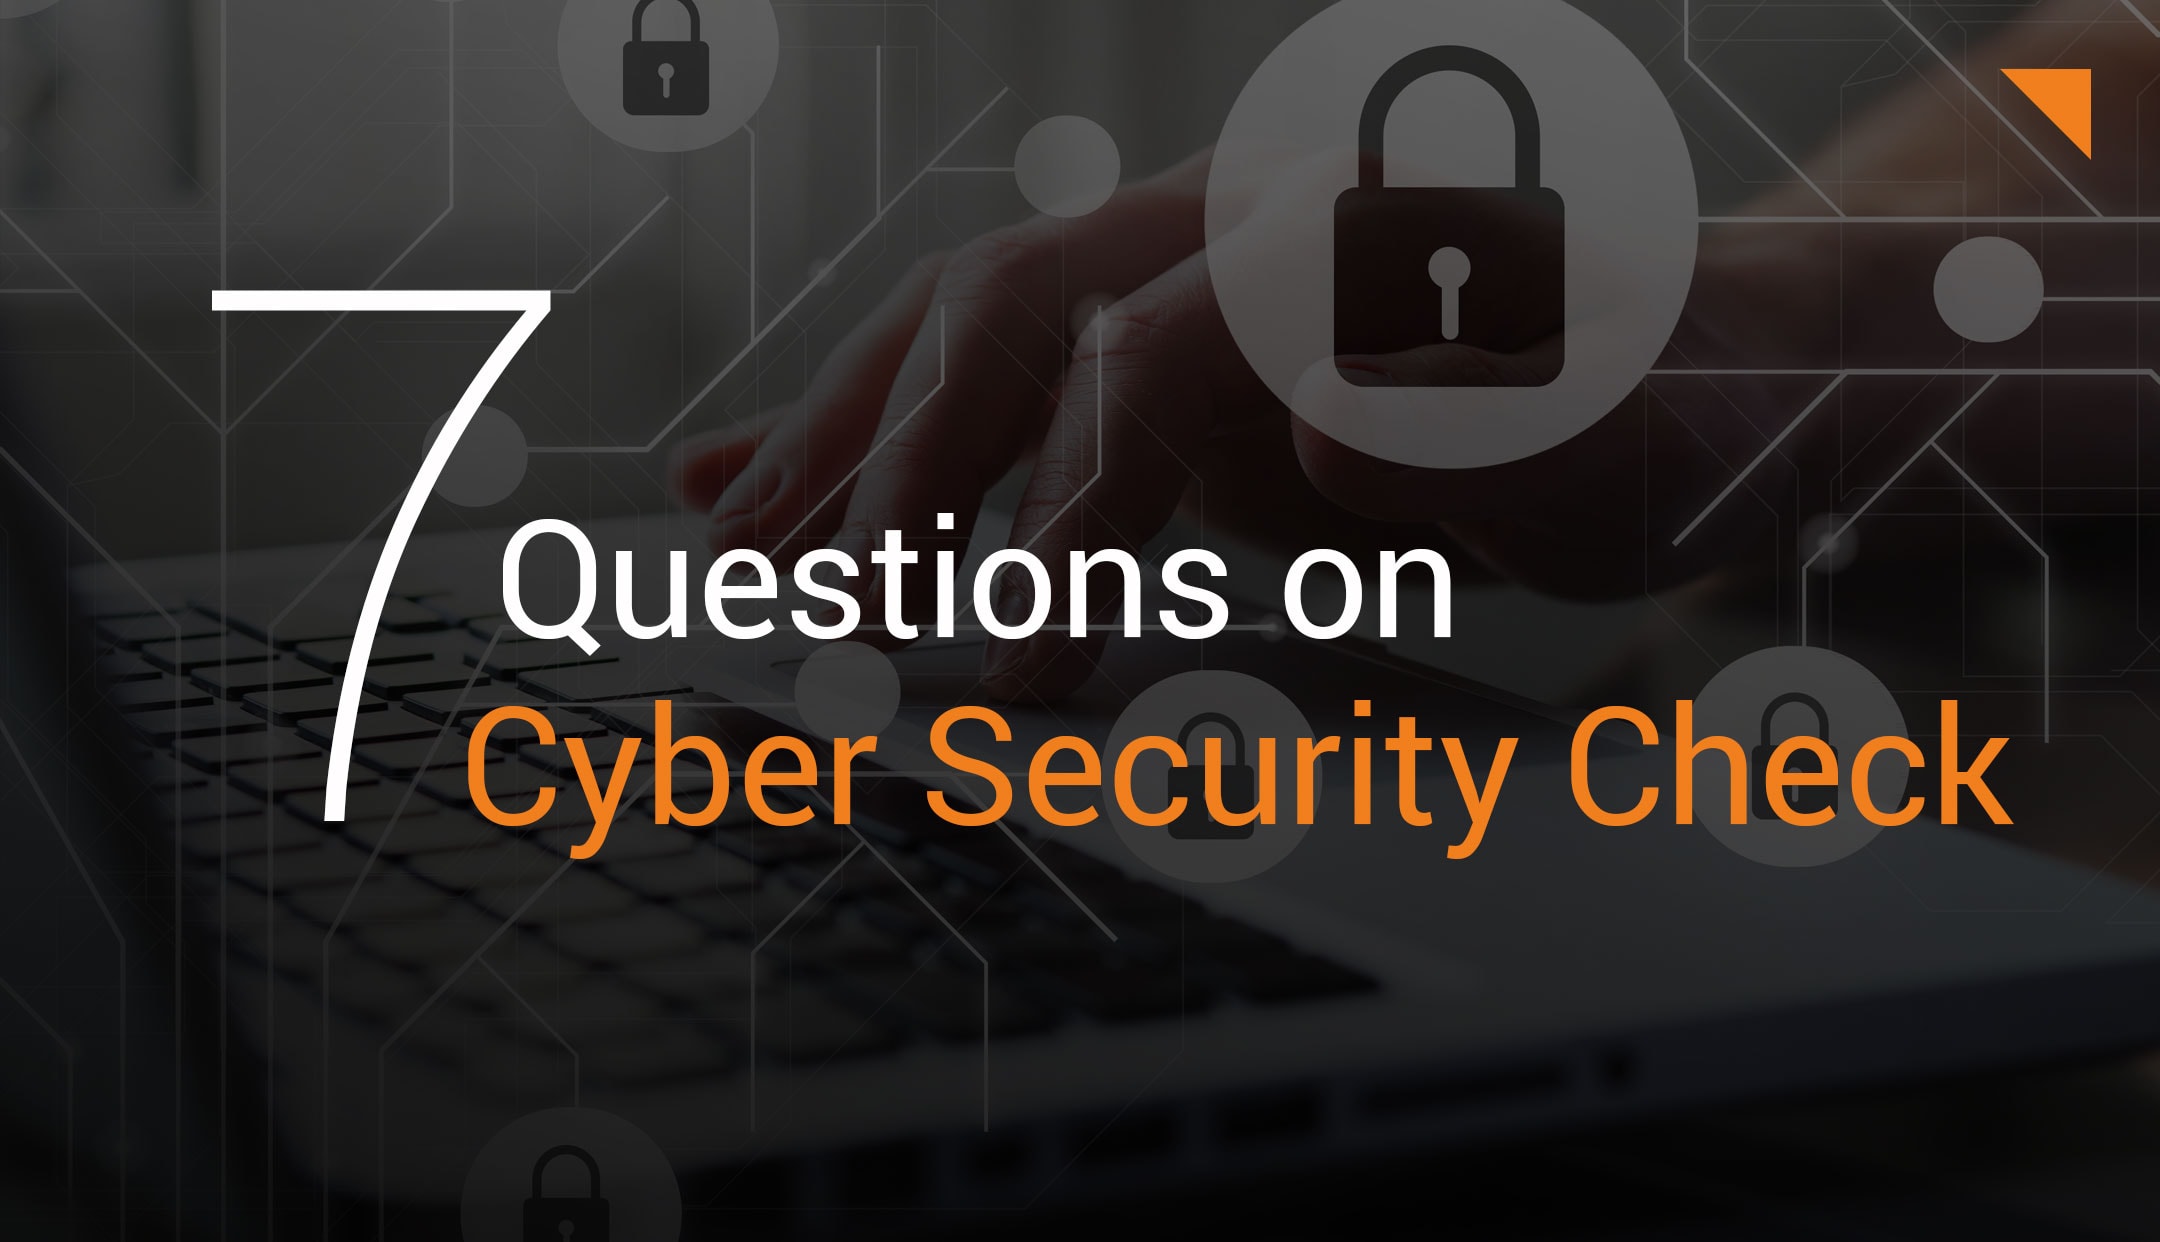 usd AG, 7 Questions on Cyber Security Check